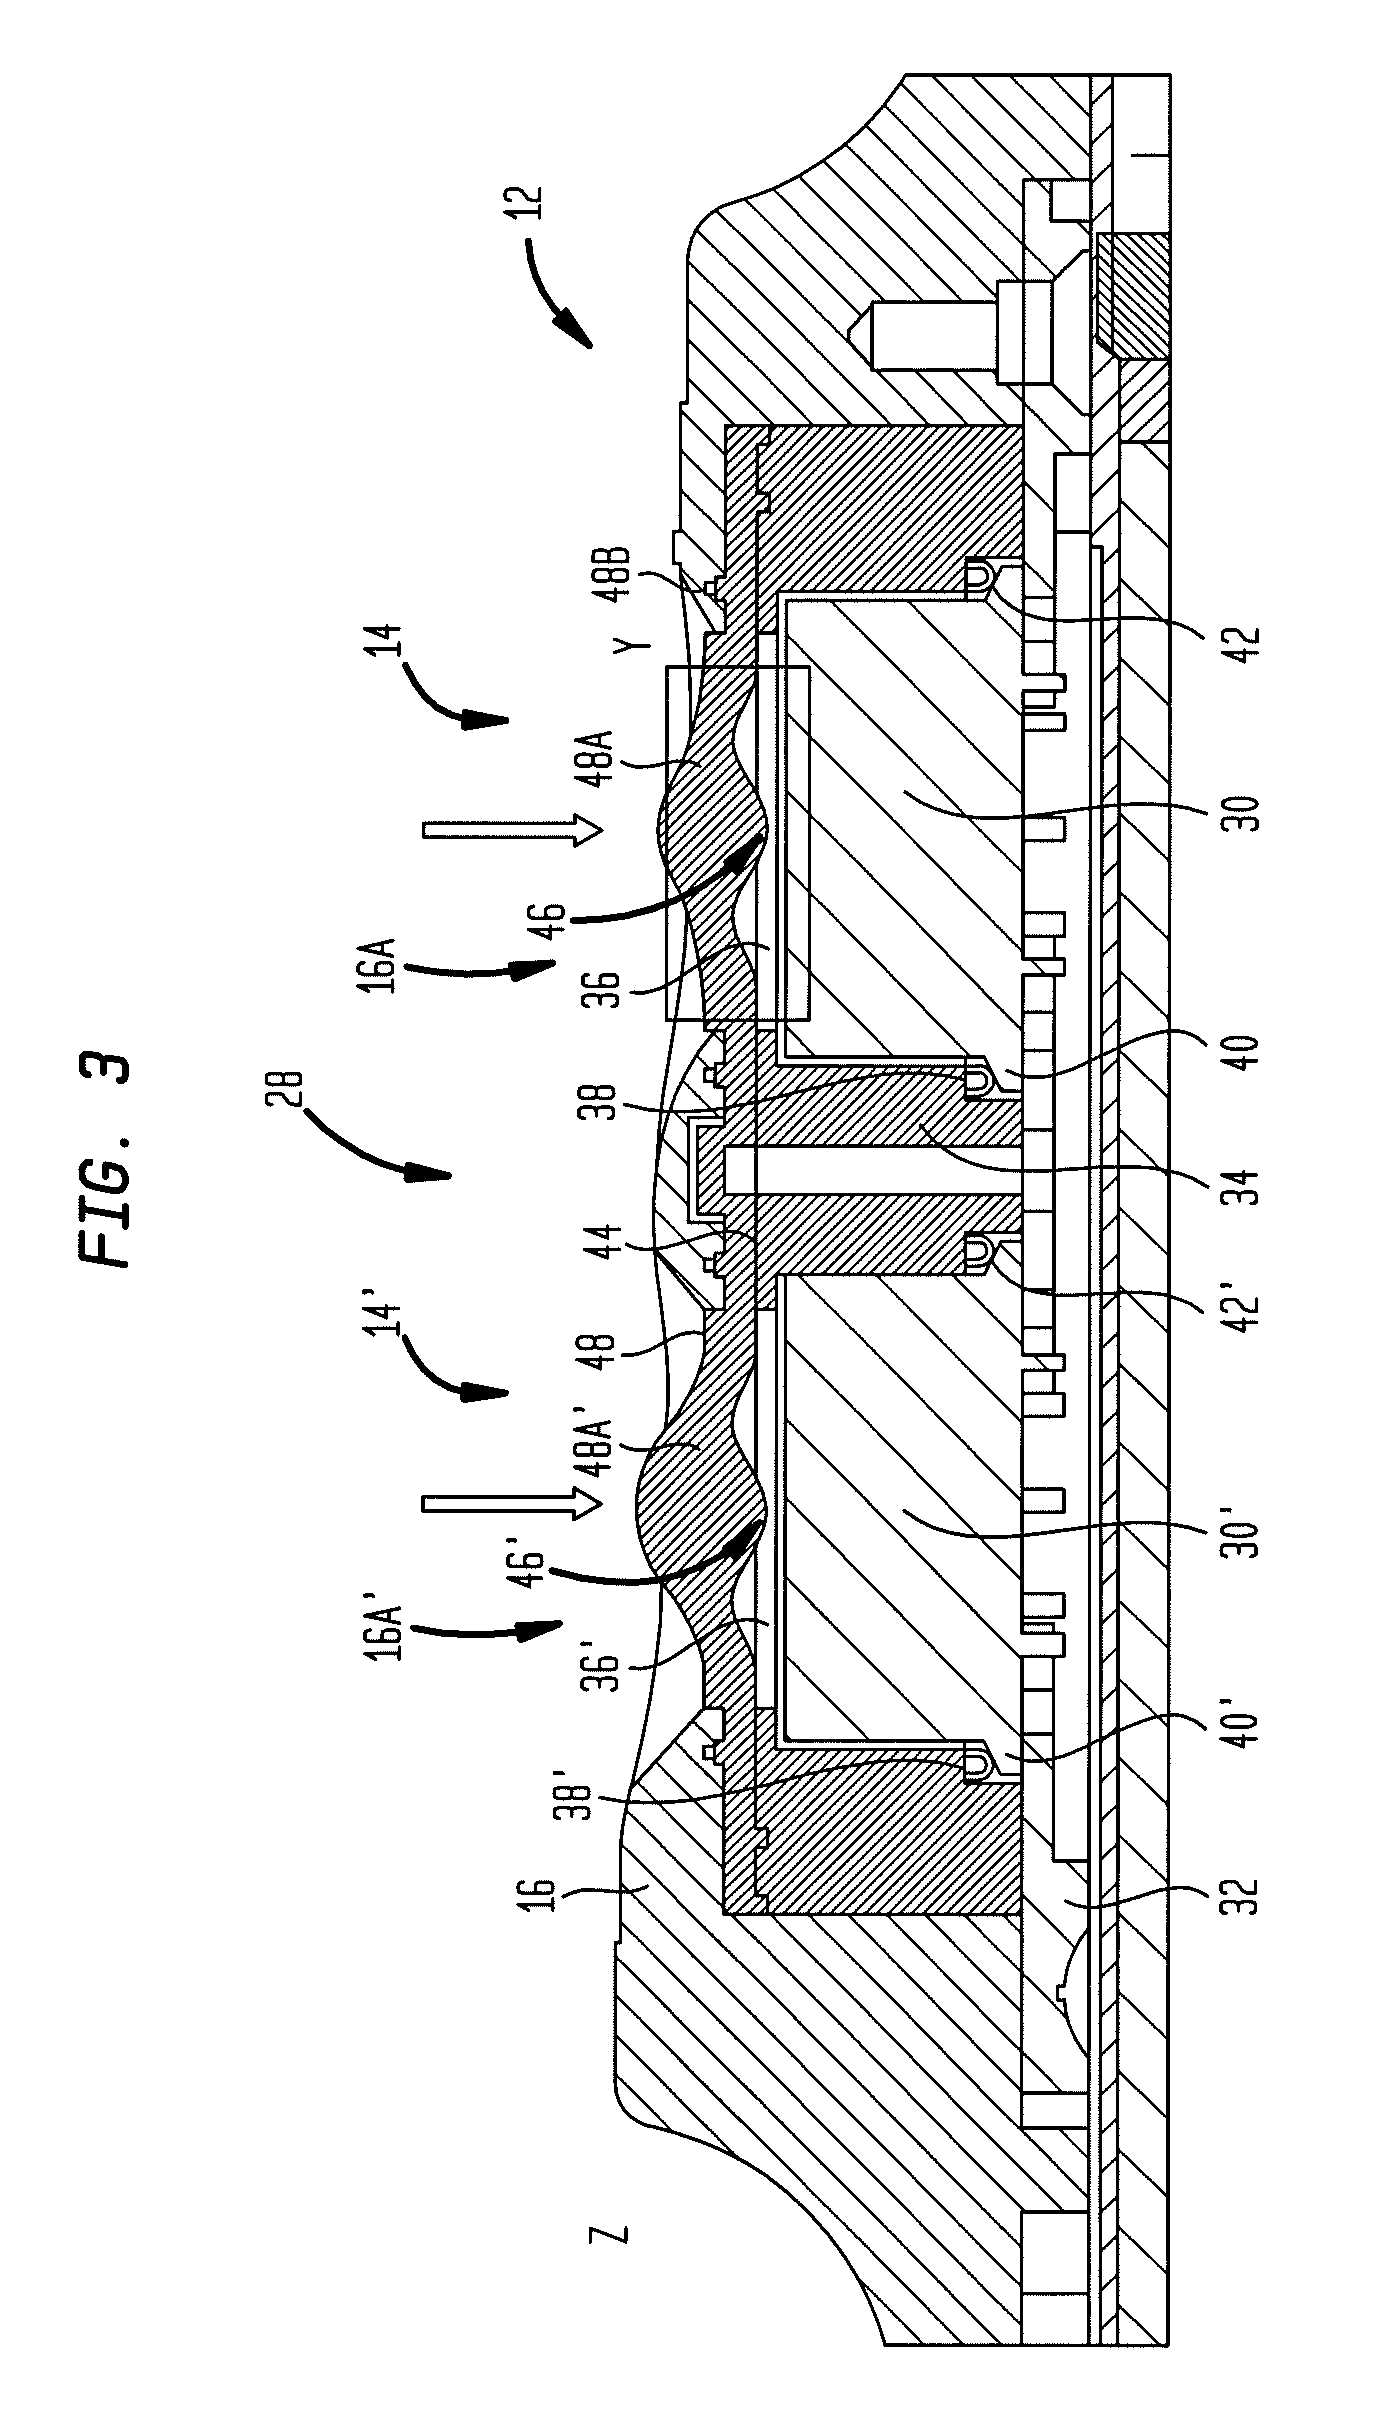 Surgical power tool and actuation assembly therefor